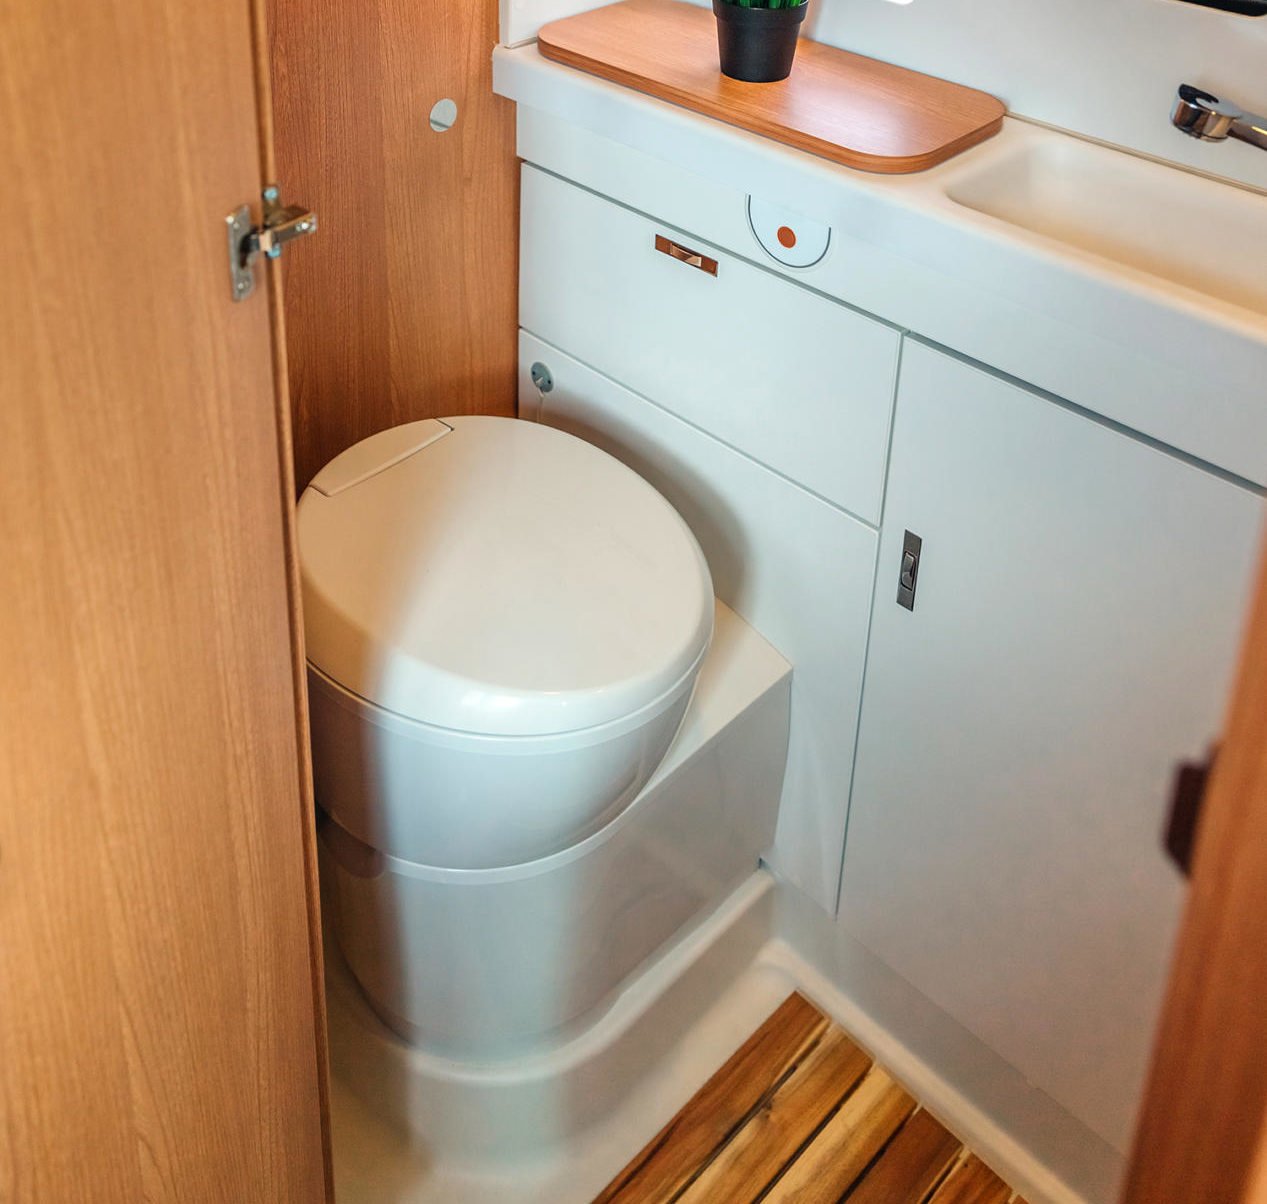 Toilet in a trailer or RV